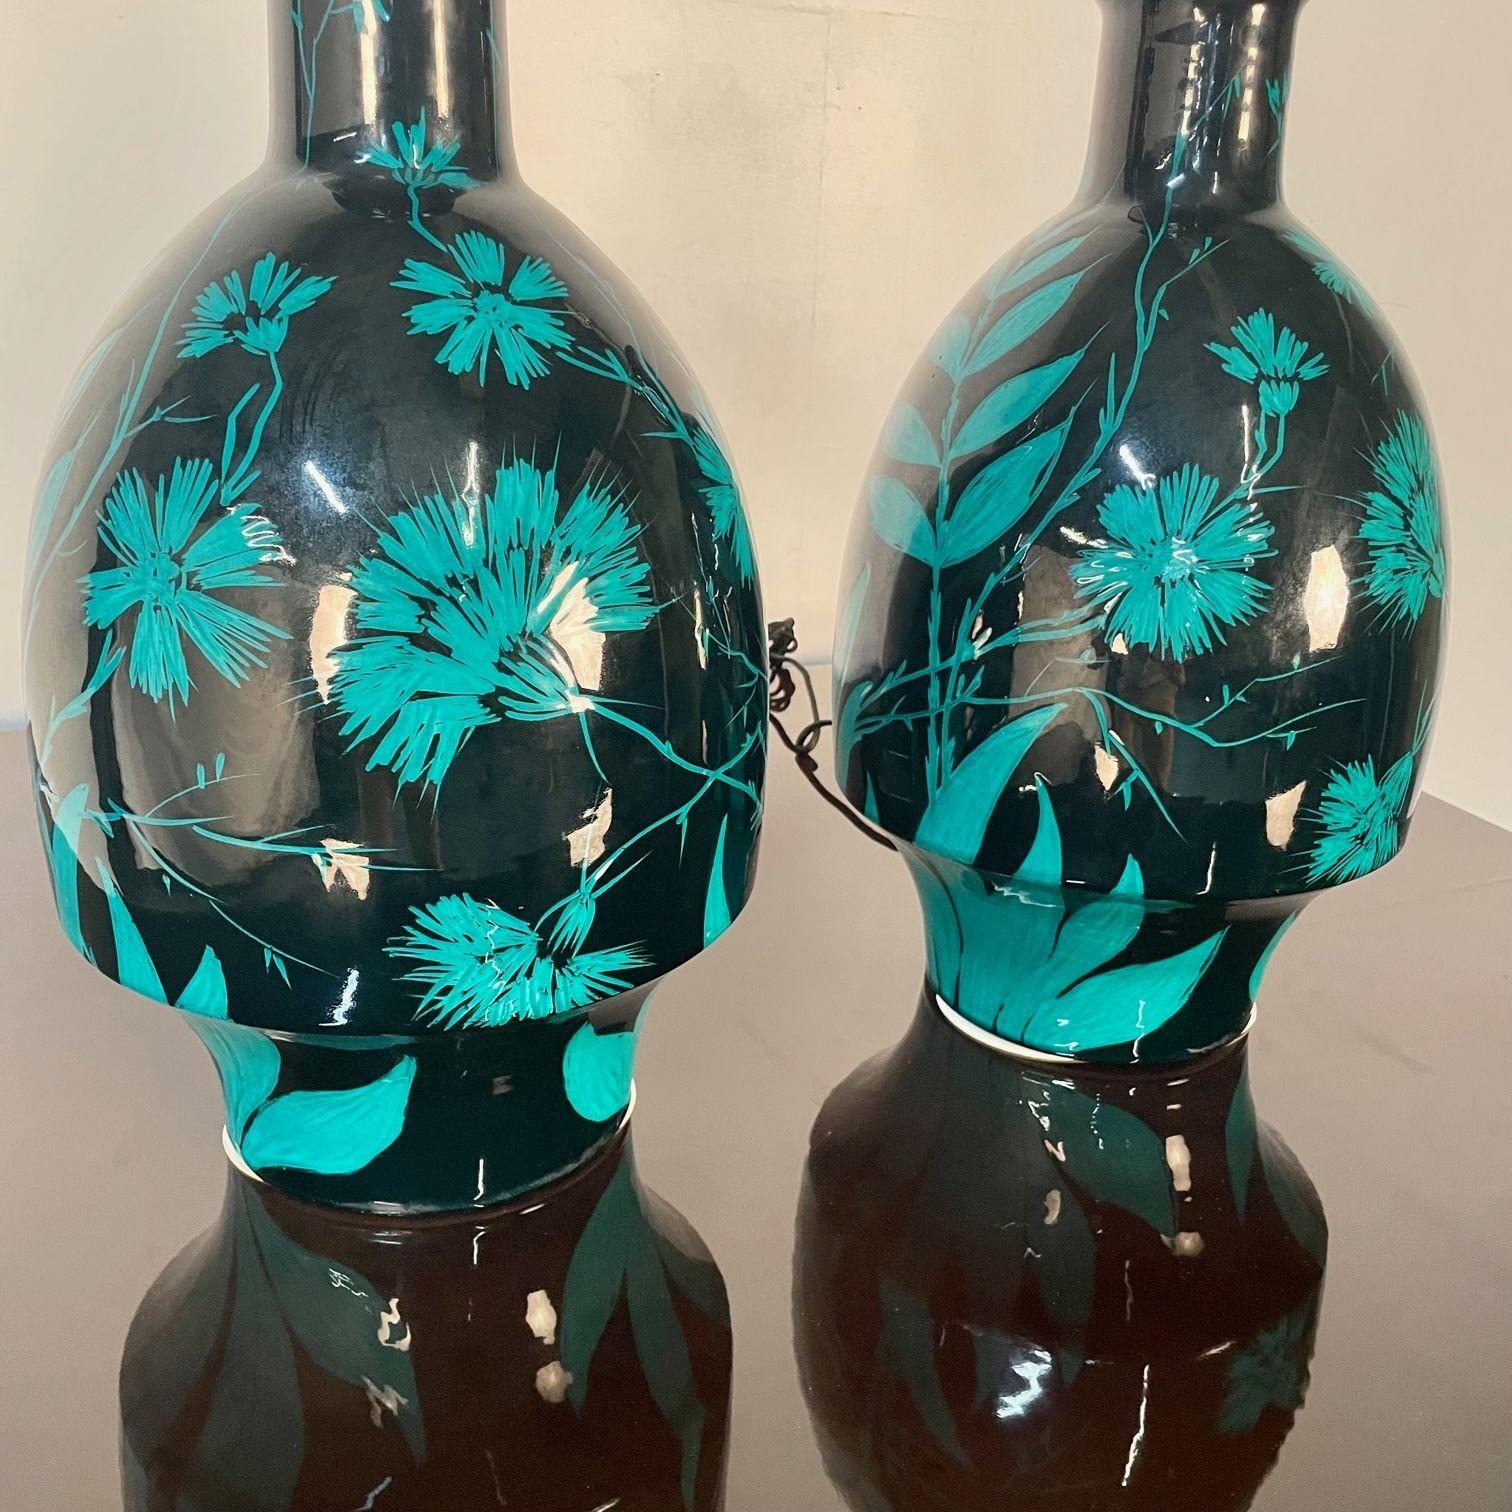 Pair of Mid-Century Modern Ceramic Floral Motif Table Lamps, Green and Blue For Sale 1